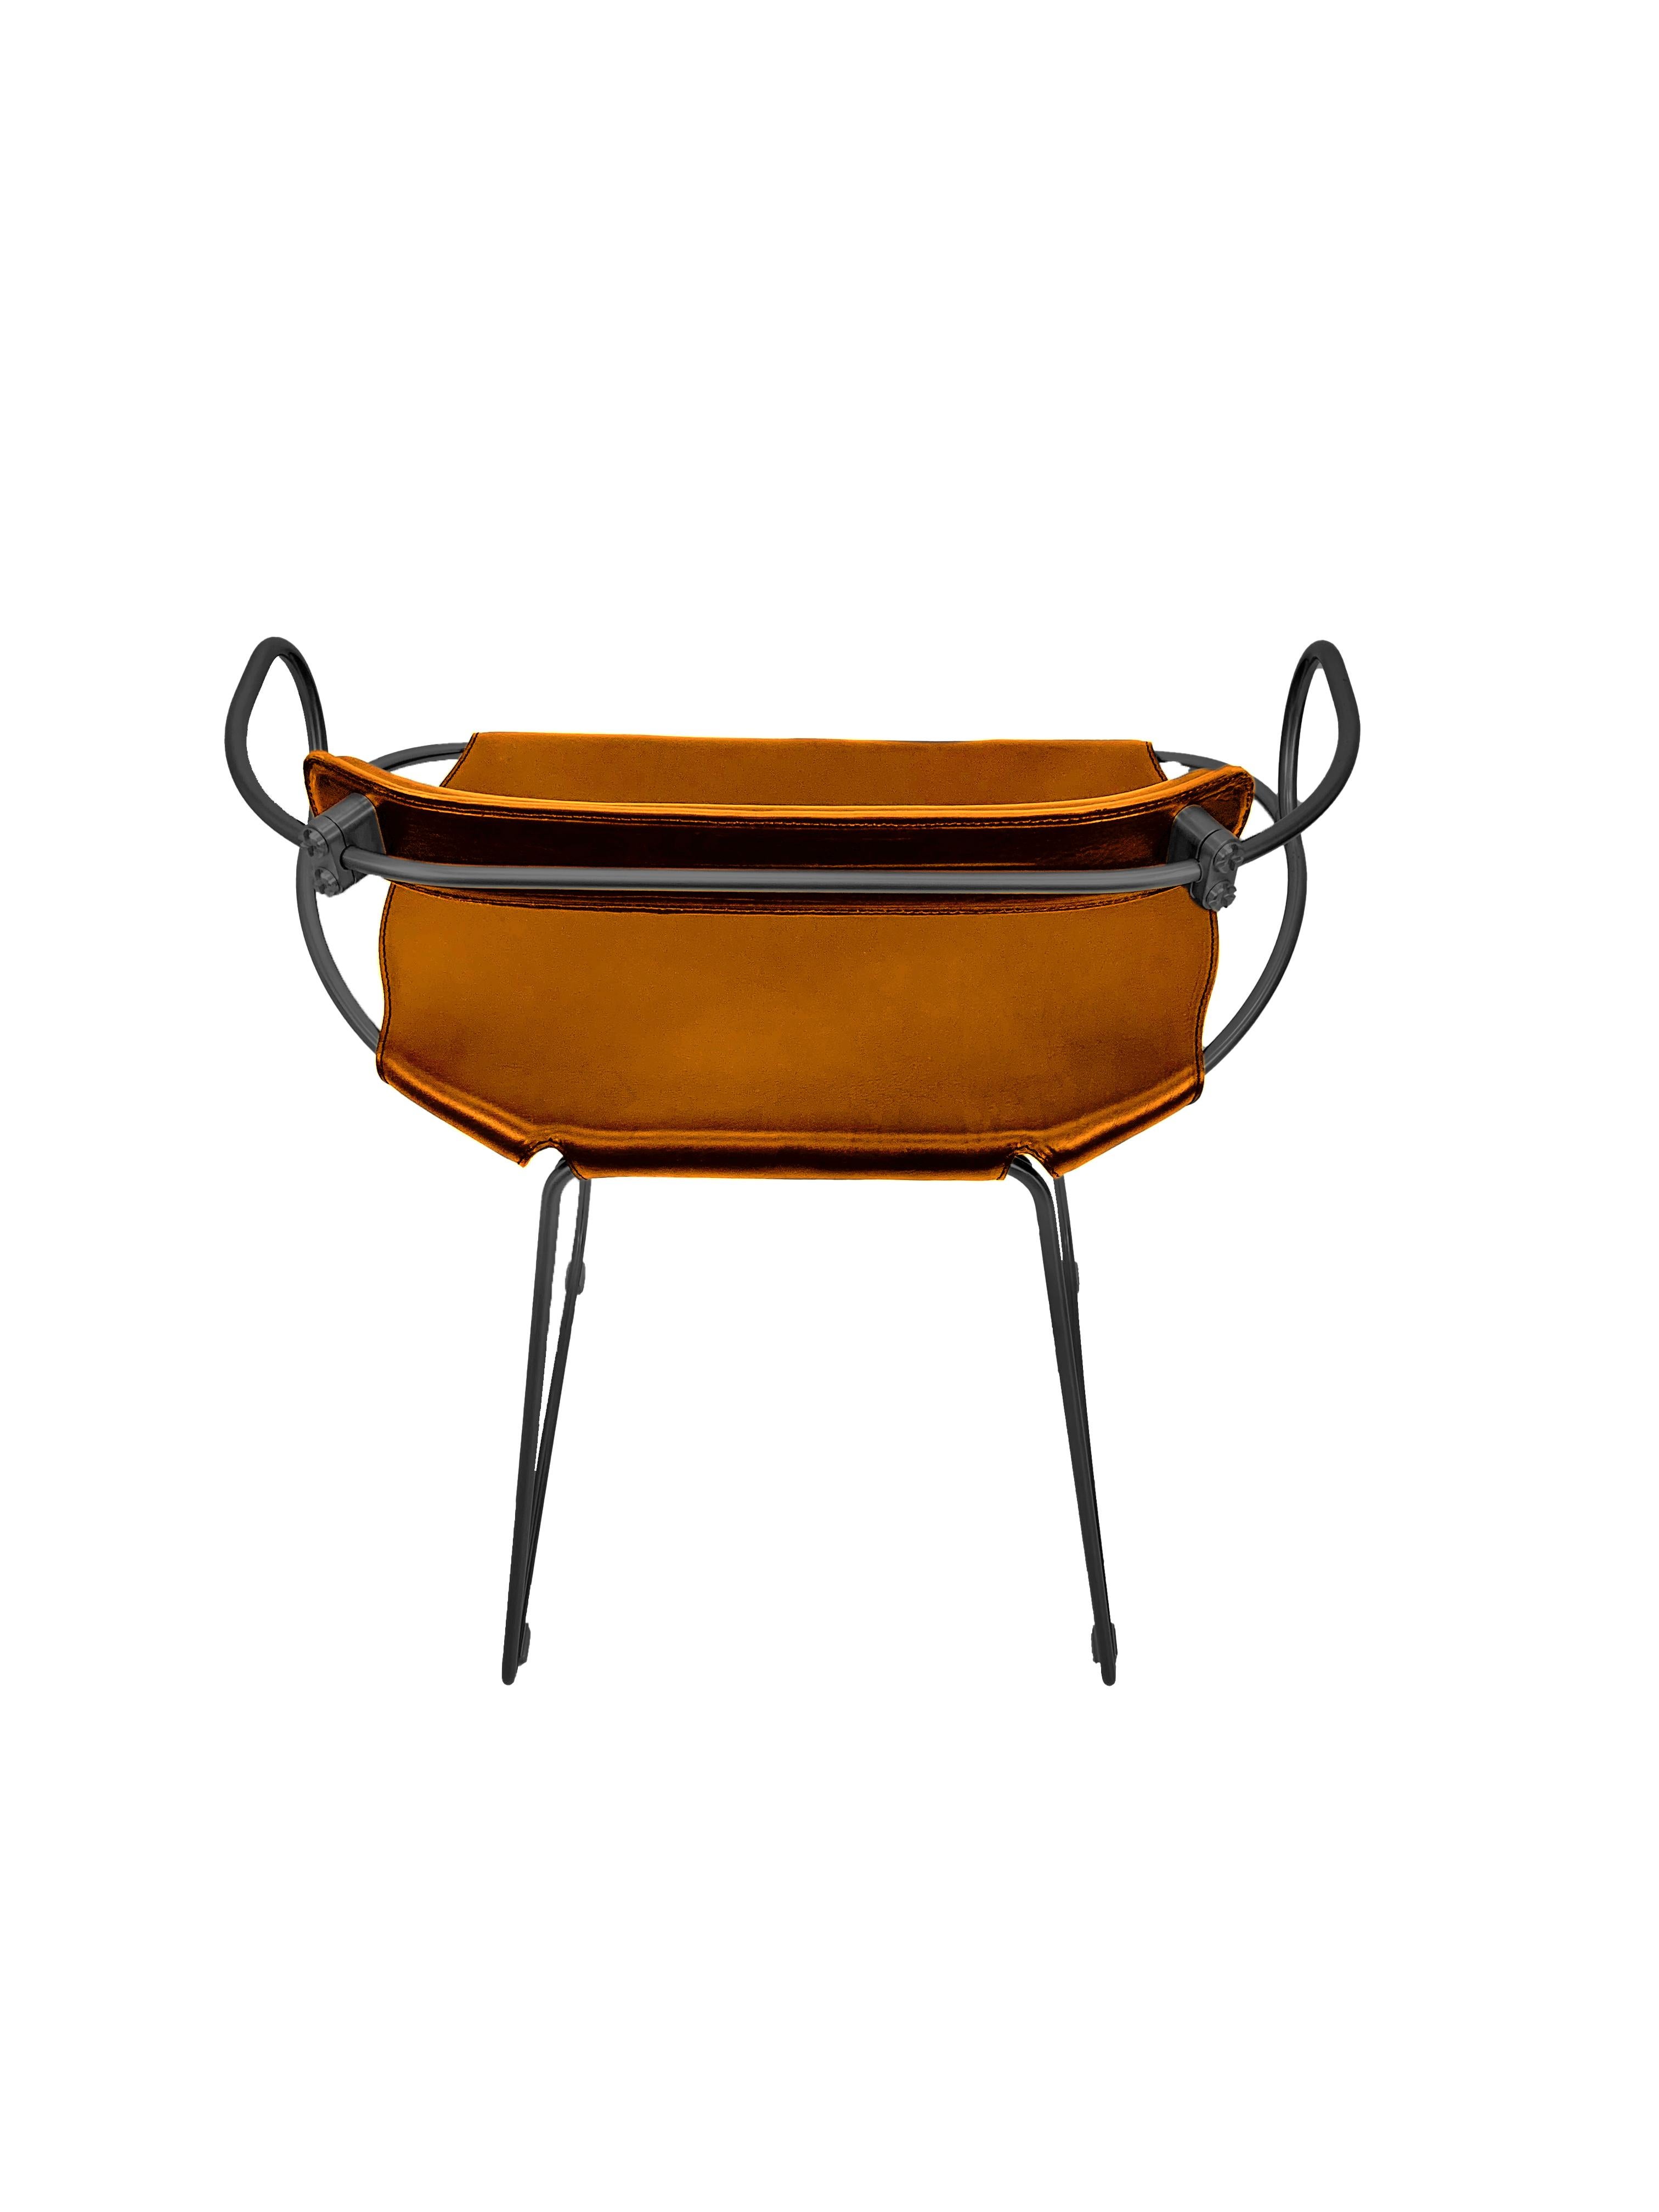 bar stools with backrest